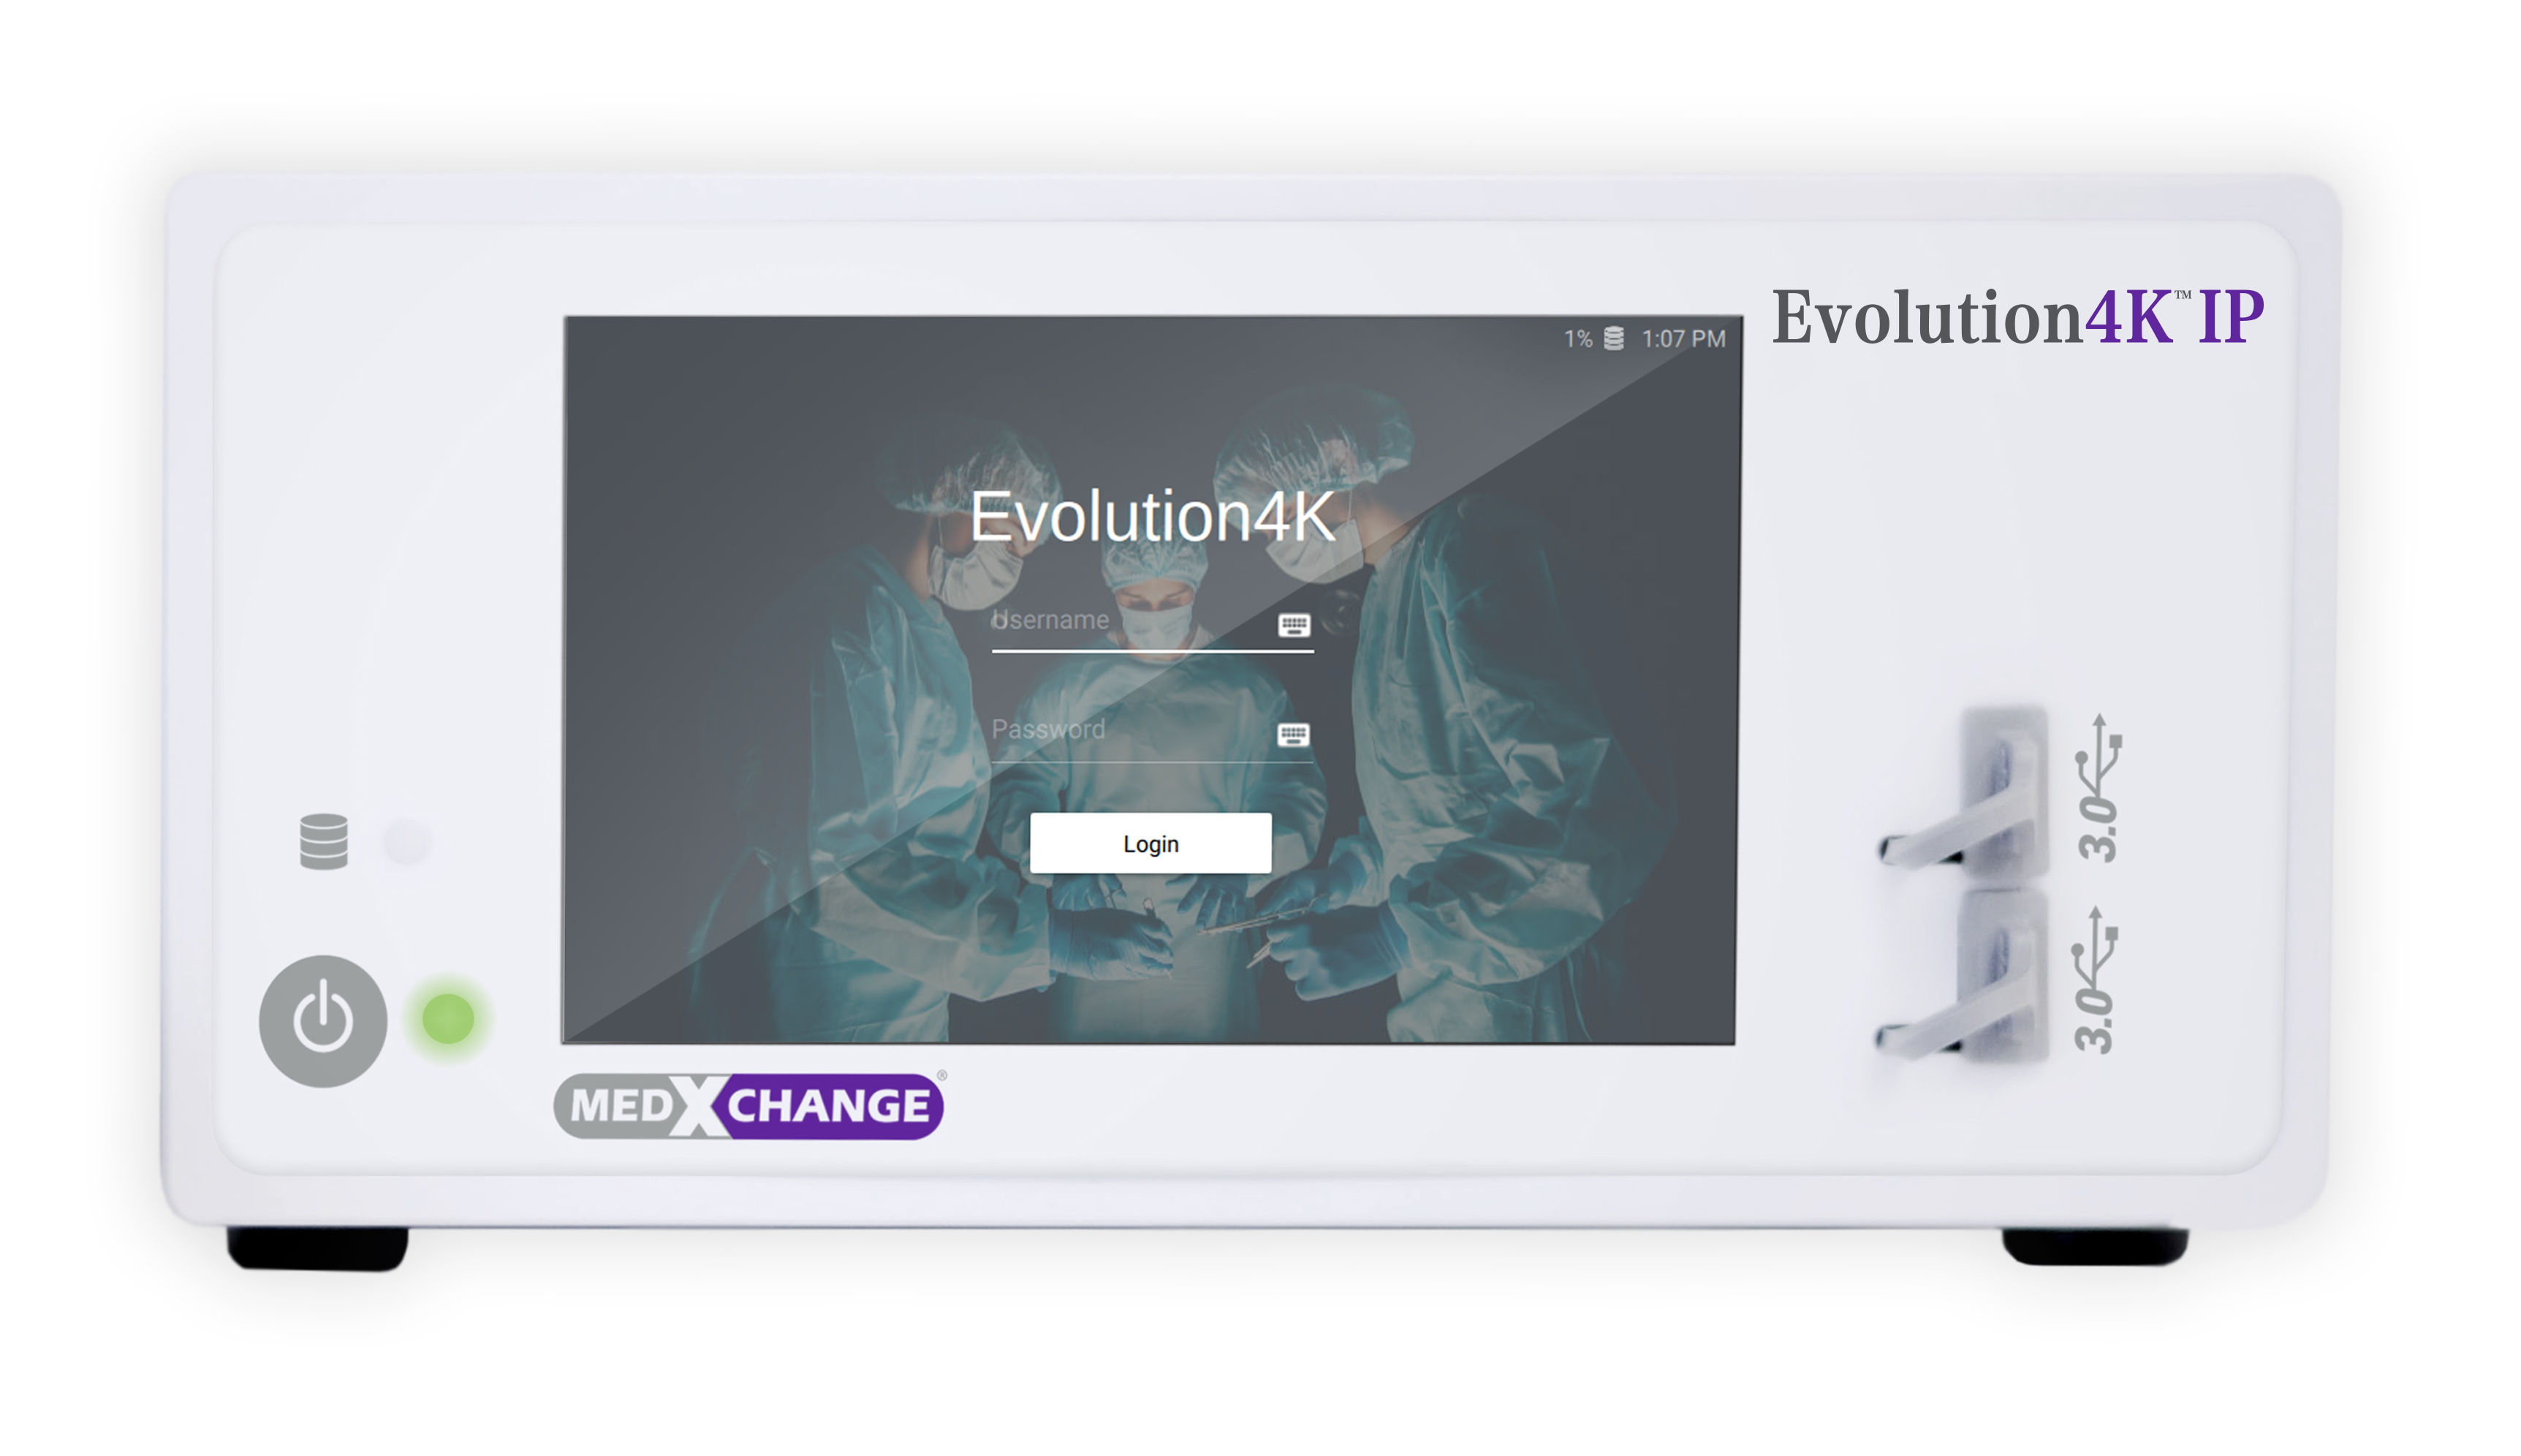 - Med X Change - Surgical Video Recording Systems - 1080p Medical Video